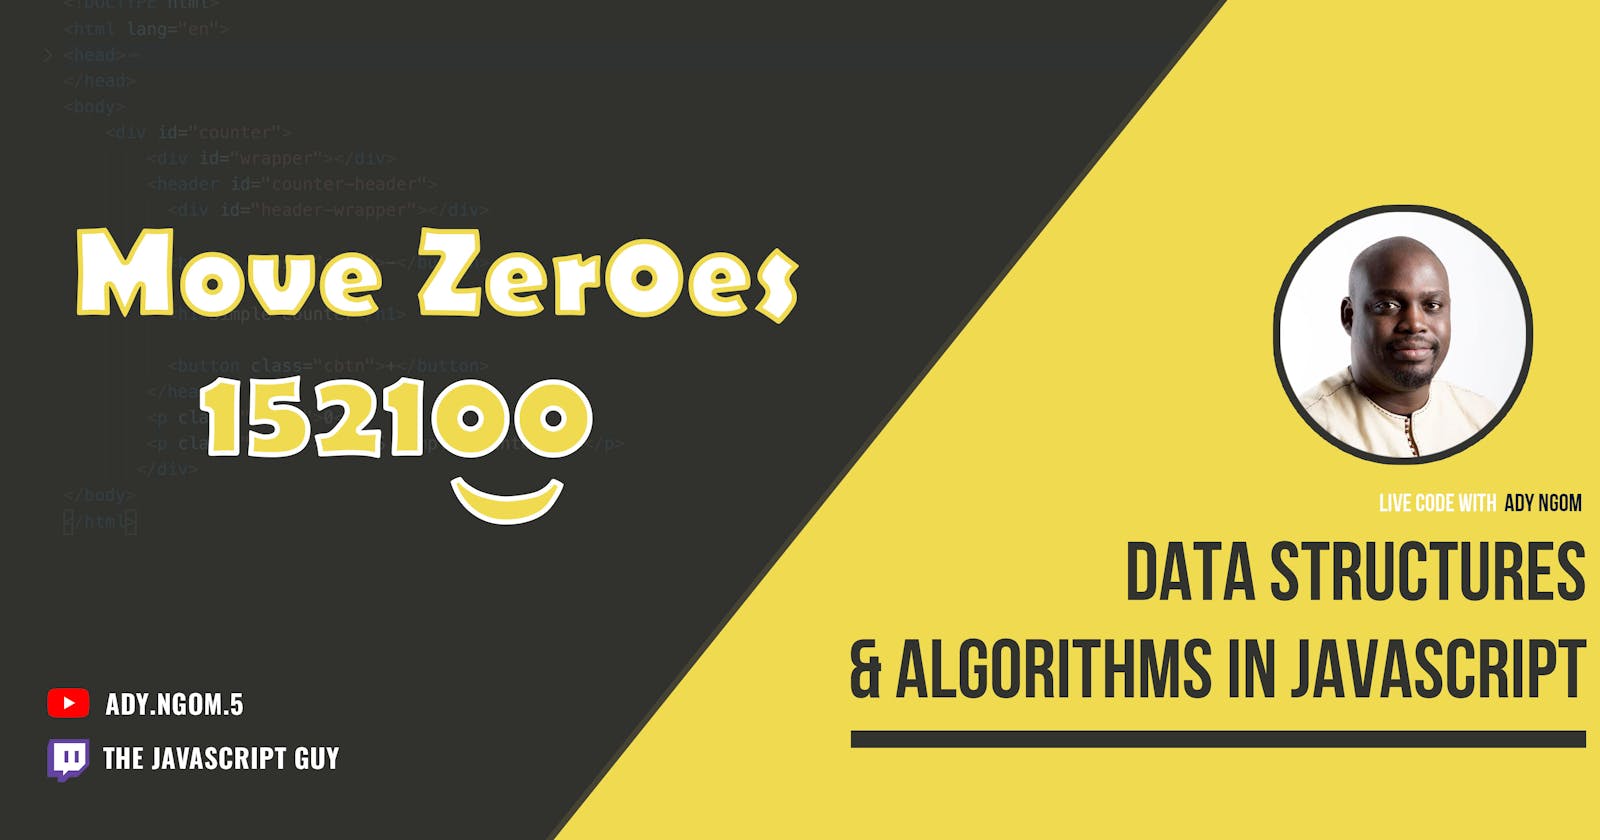 Moving Zeros Code Challenge - JavaScript Data Structures and Algorithms